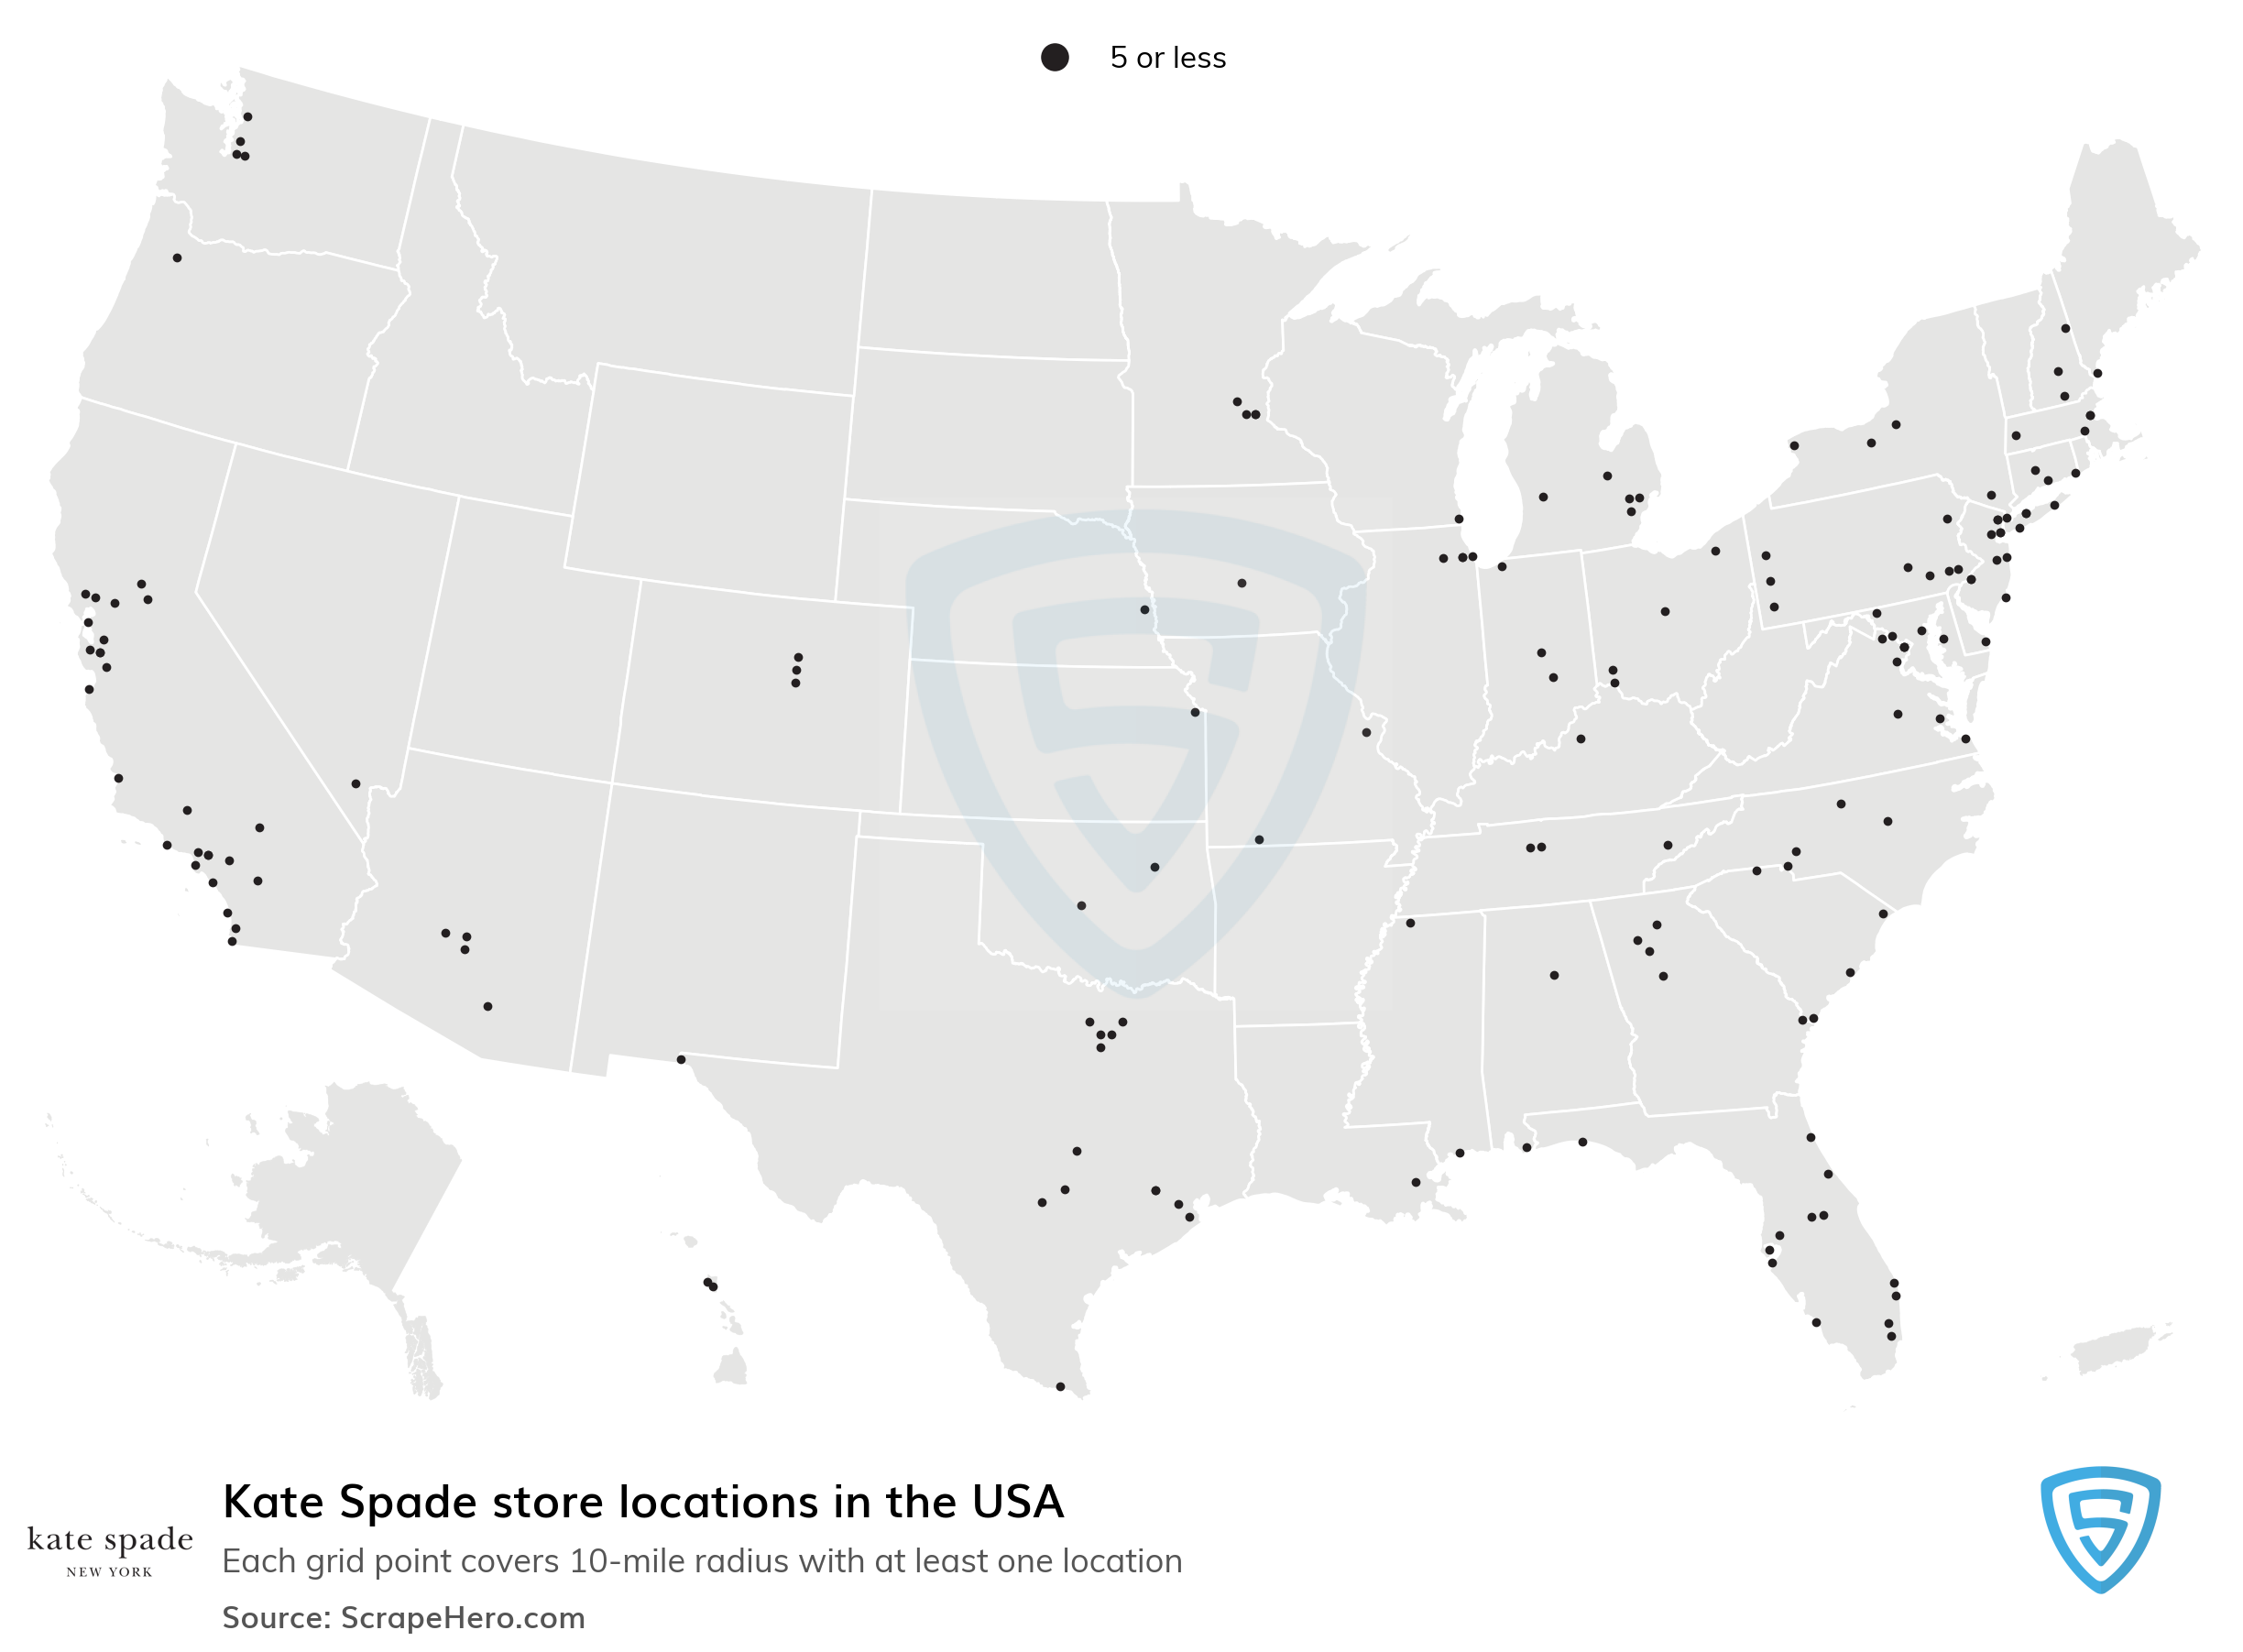 Number of Kate Spade locations in the USA in 2023 | ScrapeHero